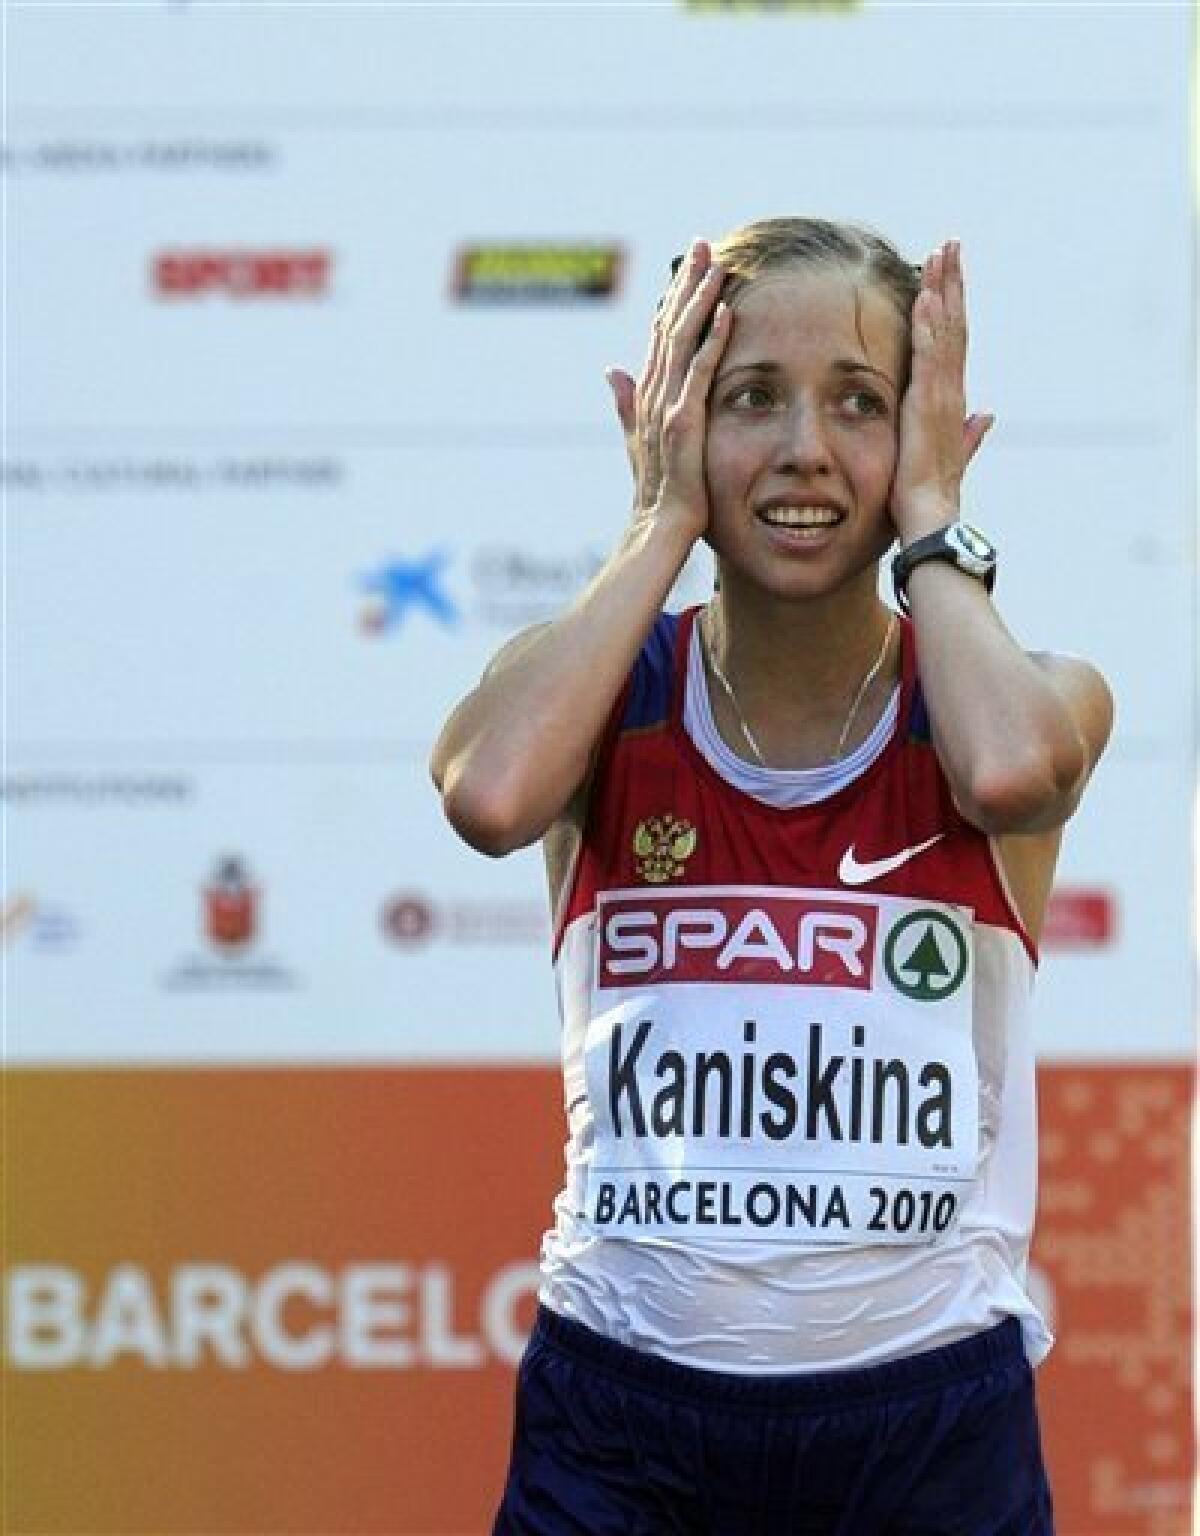 Russia's Olga Kaniskina reacts after winning the Women's 20km Race Walk during the European Athletics Championships, in Barcelona, Spain, Wednesday, July 28, 2010. (AP Photo/Manu Fernandez)